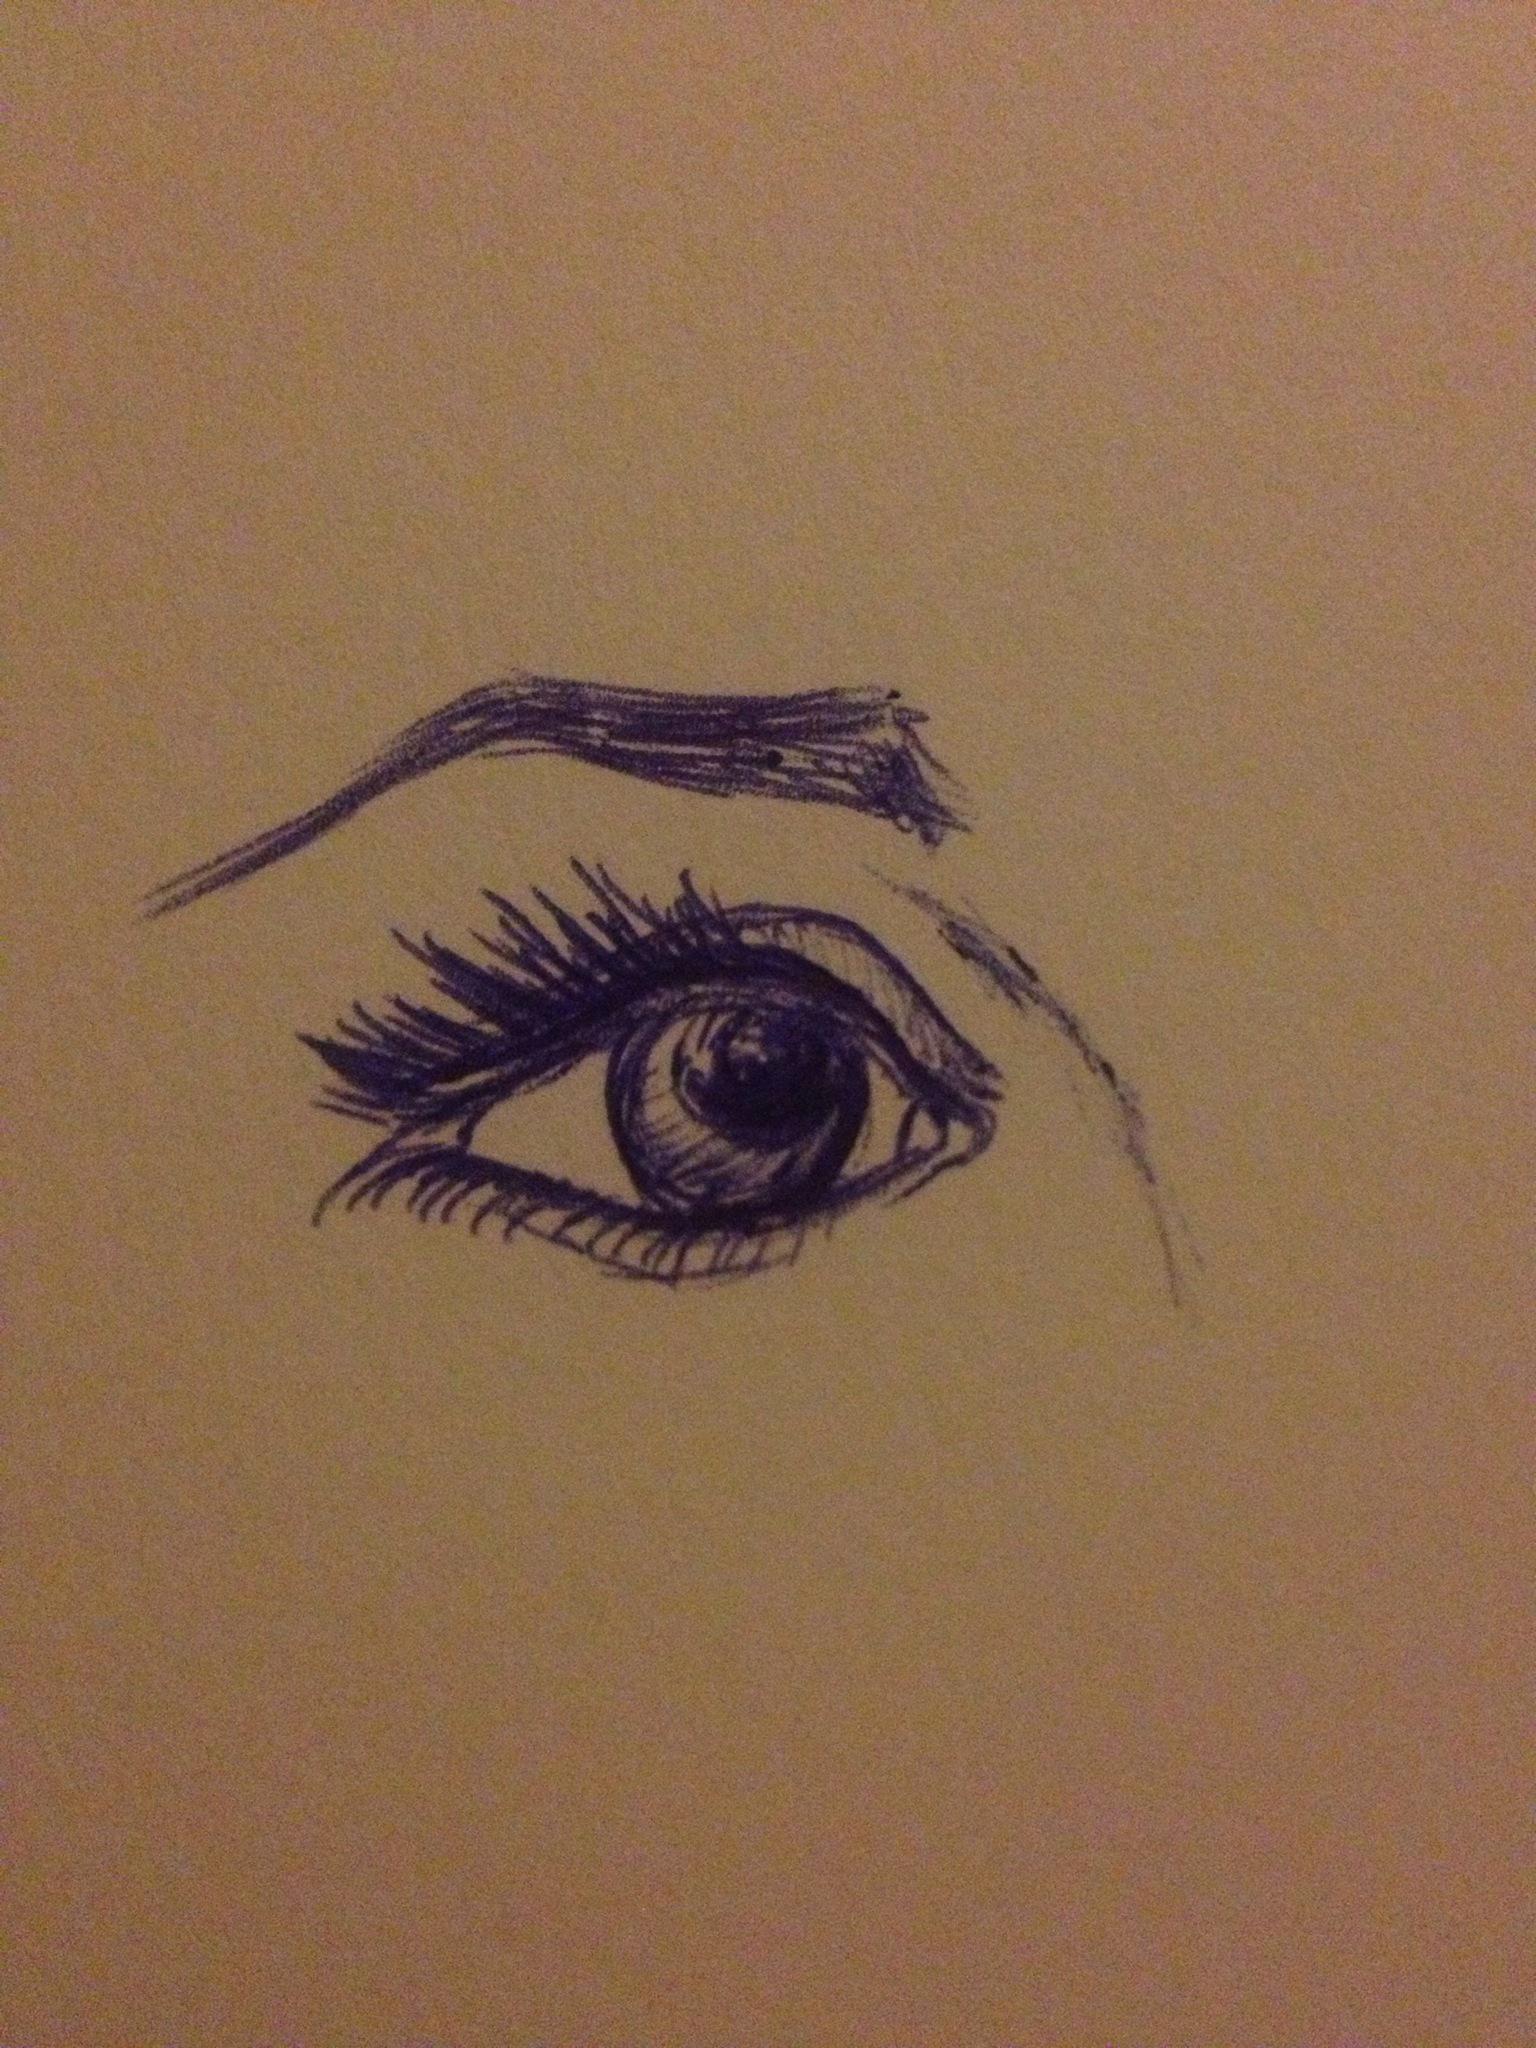 How To Draw A Realistic Eye And Eyebrow In Pen B C Guides